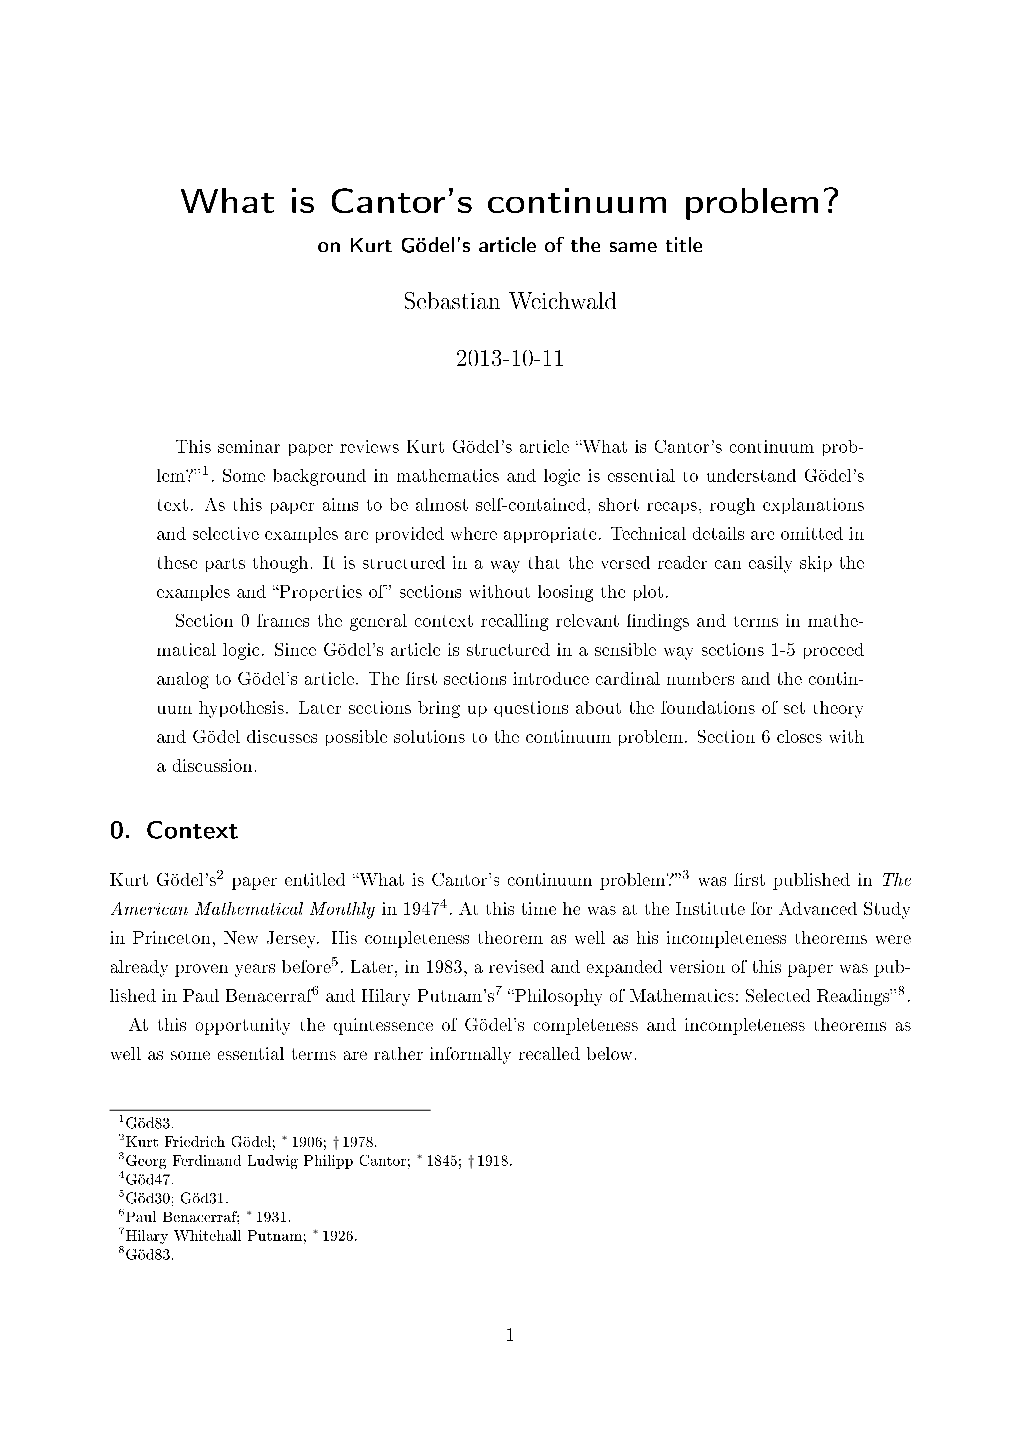 What Is Cantor's Continuum Problem? on Kurt Gödel's Article of the Same Title